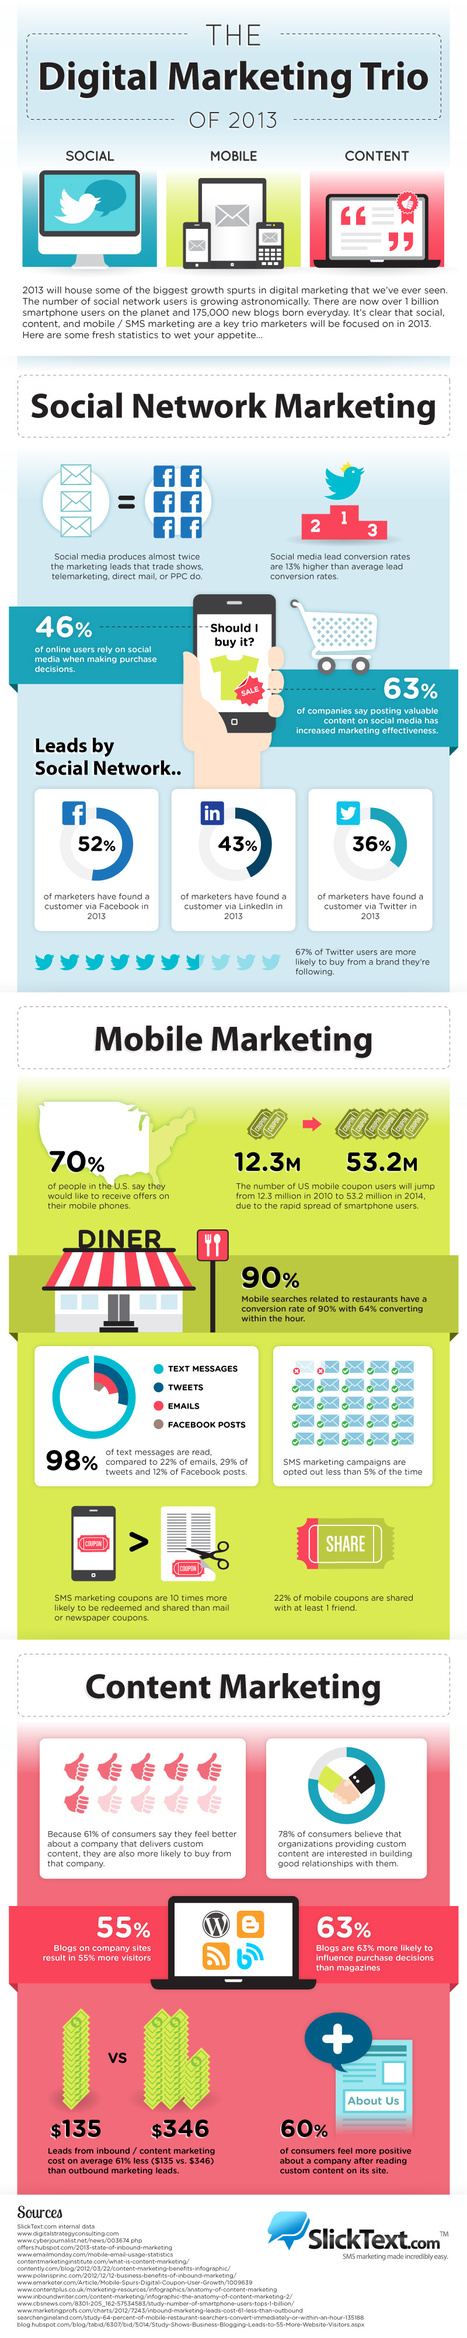 The Digital Marketing Trio Of 2013 [Infographic] | Digital Collaboration and the 21st C. | Scoop.it